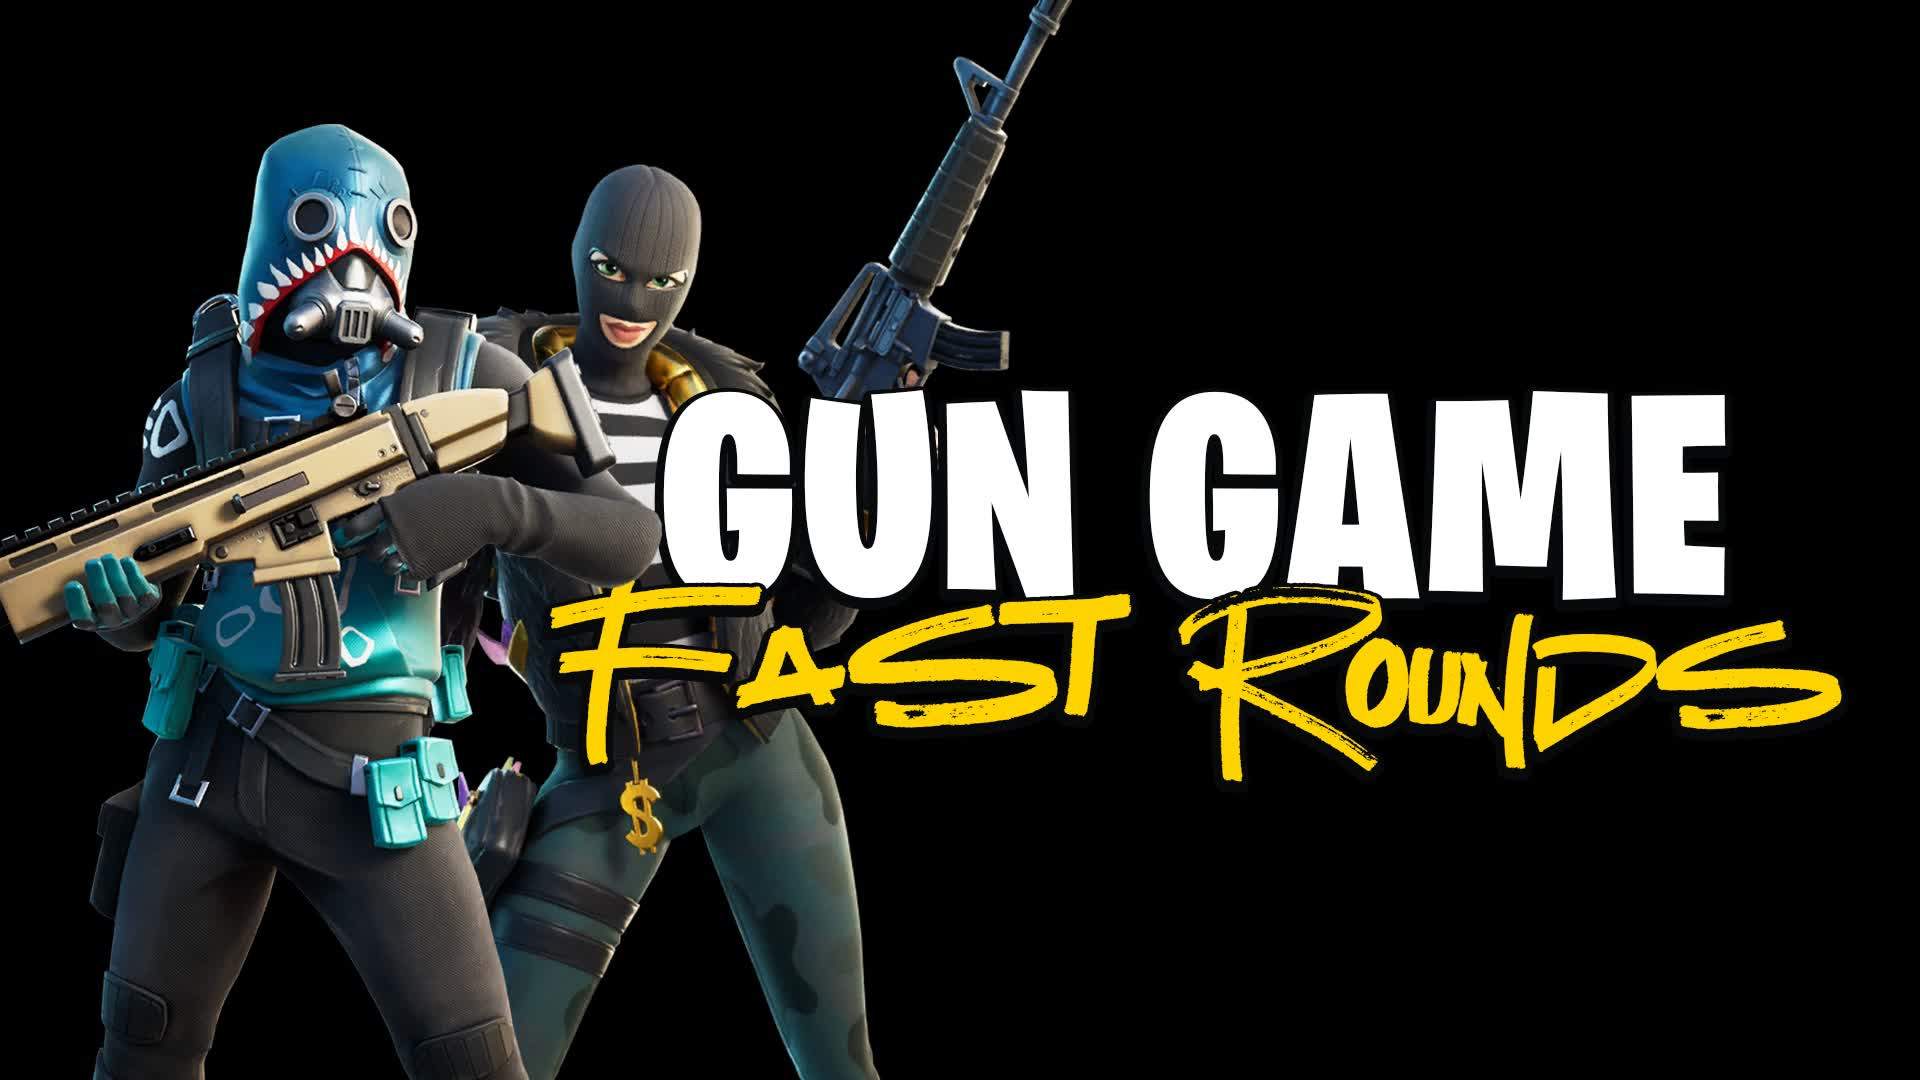 Gun Game Fast Rounds